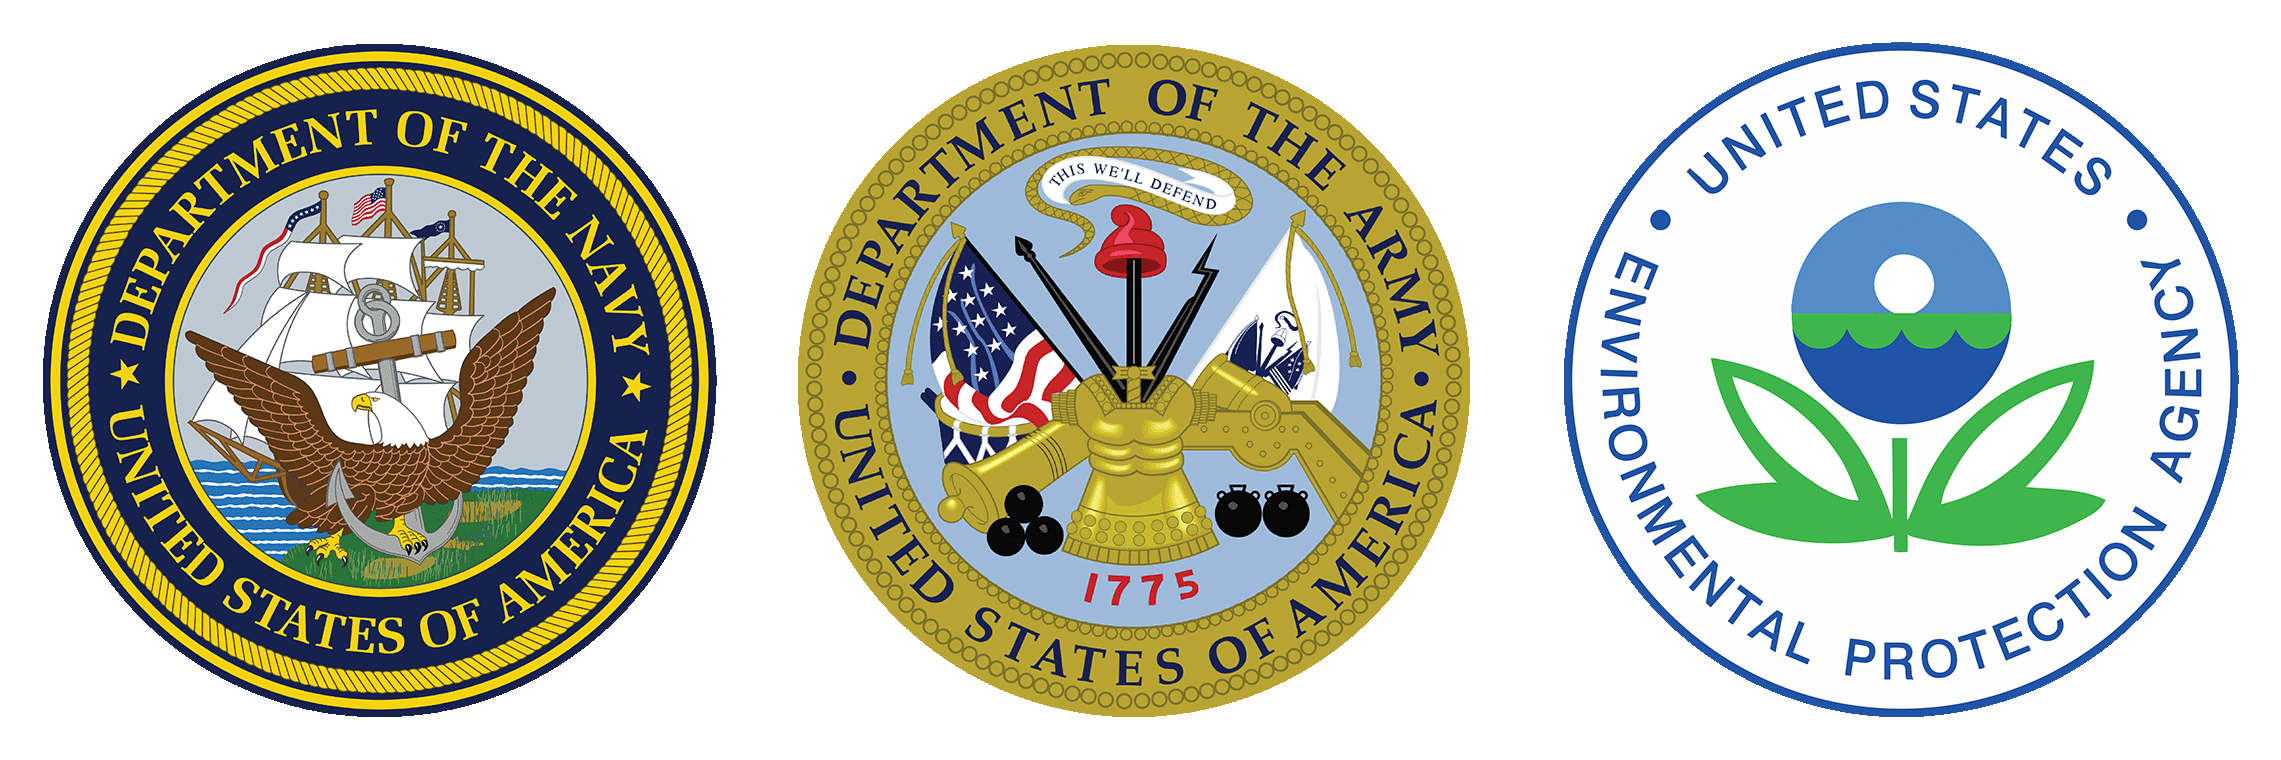 Department of the Navy, Department of the Army and Environmental Protection Agency logos